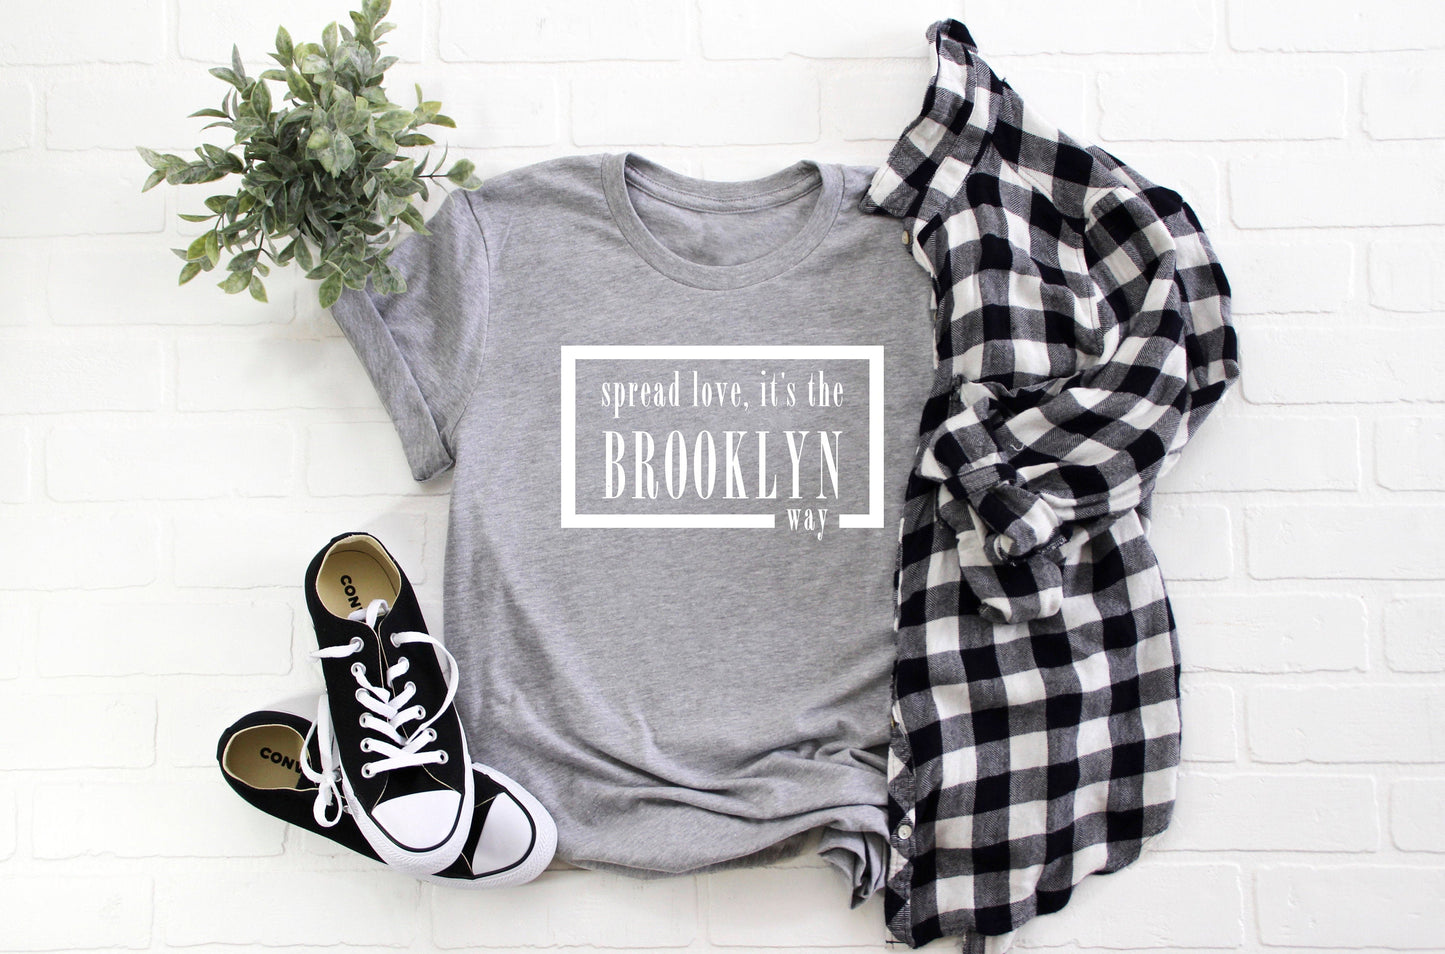 Grey t-shirt with white writing that has Biggie lyrics that states Spread love, it's the Brooklyn way.